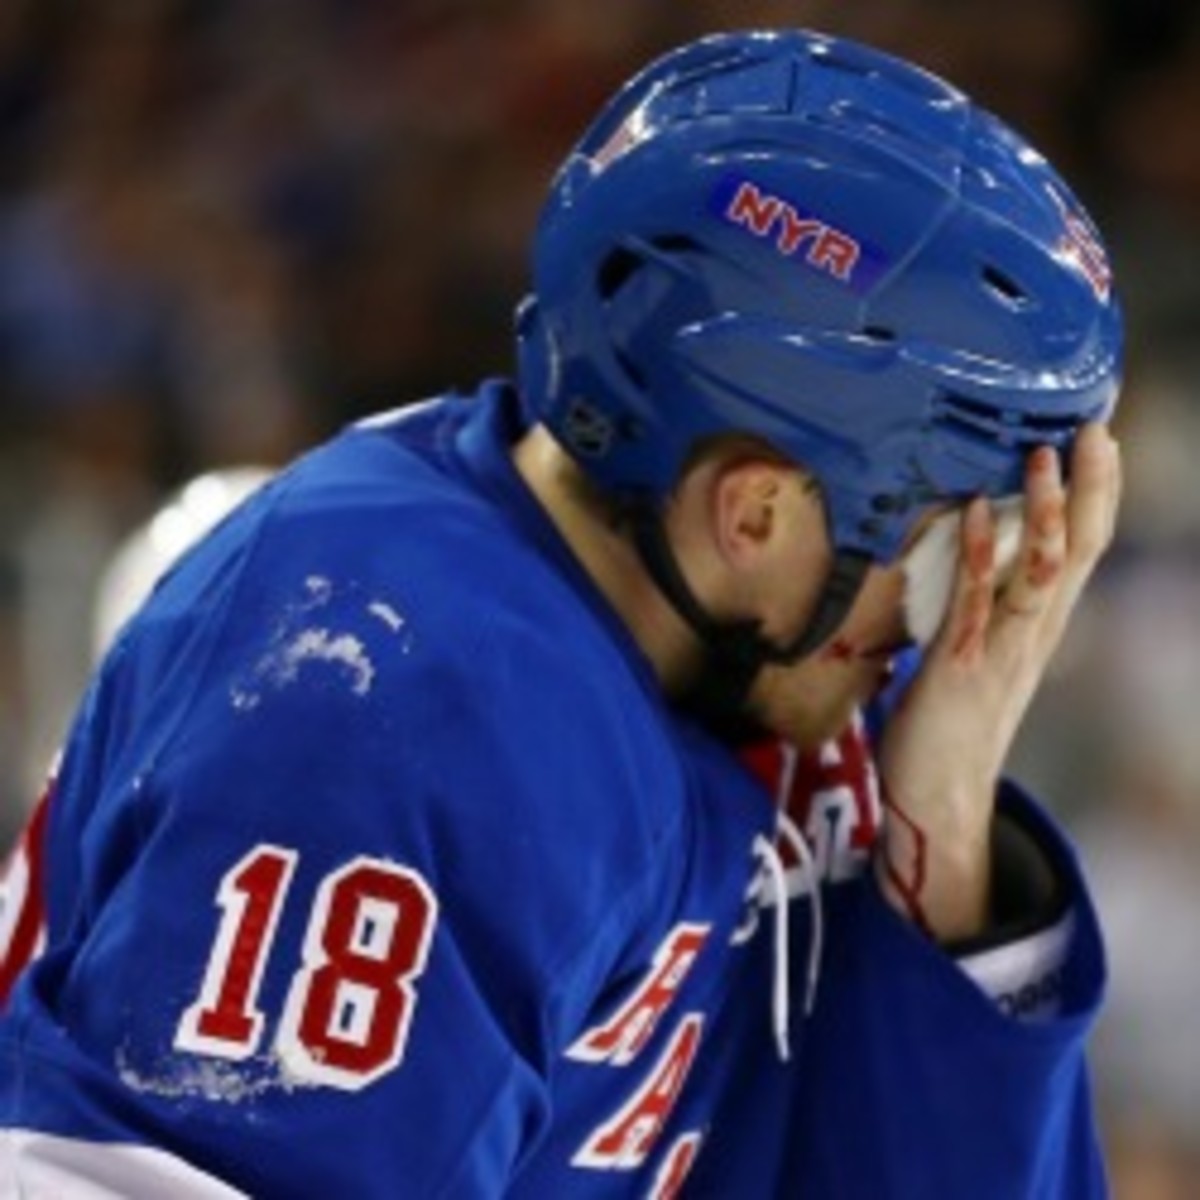 Rangers defenseman Marc Stall should make a full recovery after being hit in the eye with a puck. (Elsa/Getty Images)